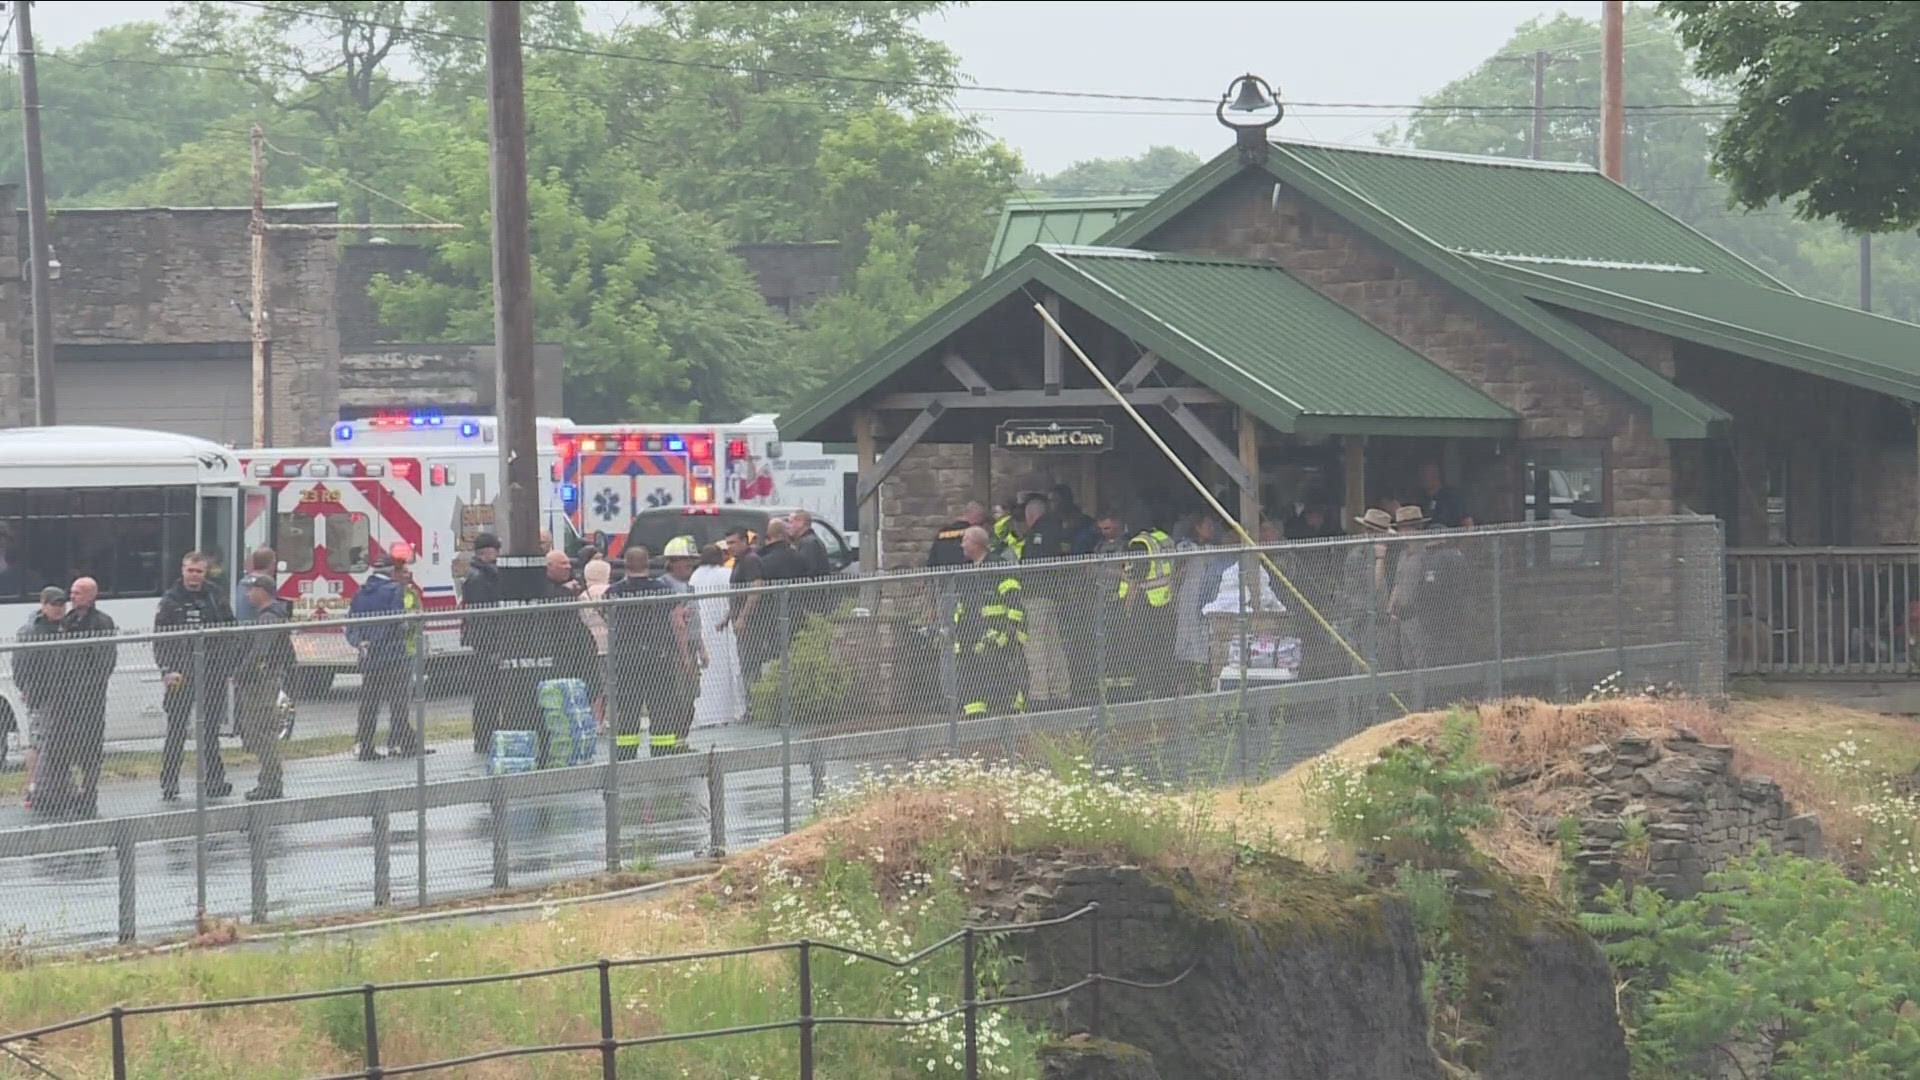 A new bill is looking to close several loopholes in the oversight of boat operations at places like the Lockport Caves where one person died last summer